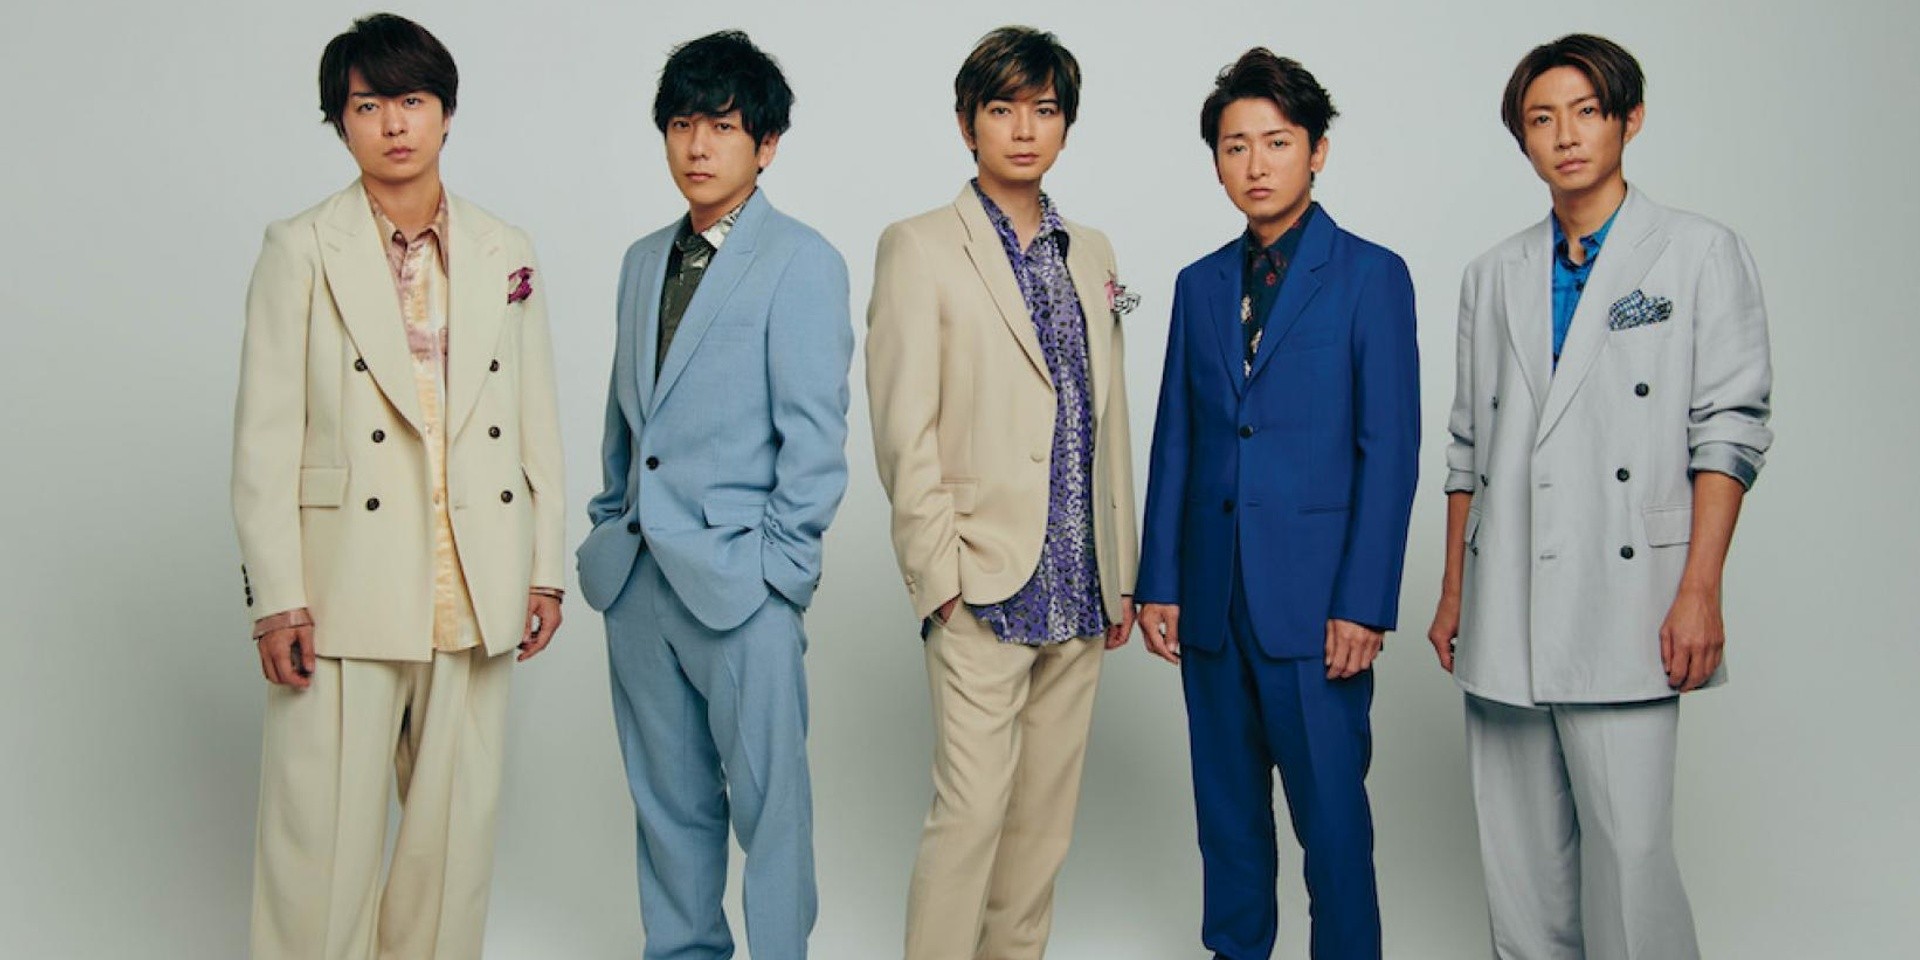 ARASHI fans set up Twitter parties and fan projects to say 'Thank You ARASHI' ahead of the band's upcoming hiatus